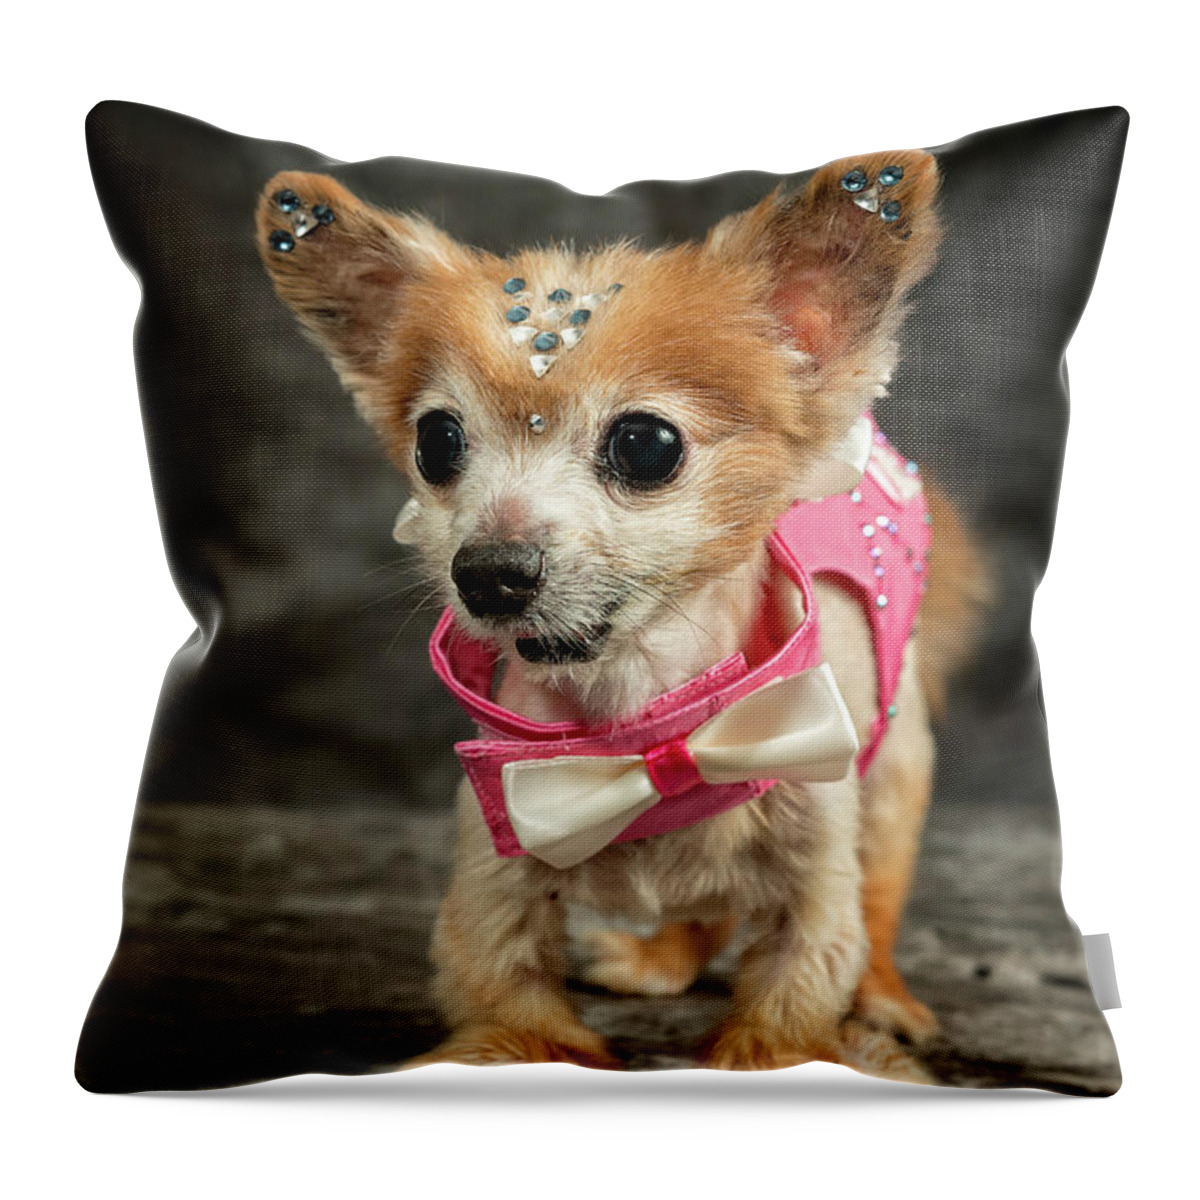 Gizmo Throw Pillow featuring the photograph 20170804_ceh1147 by Christopher Holmes